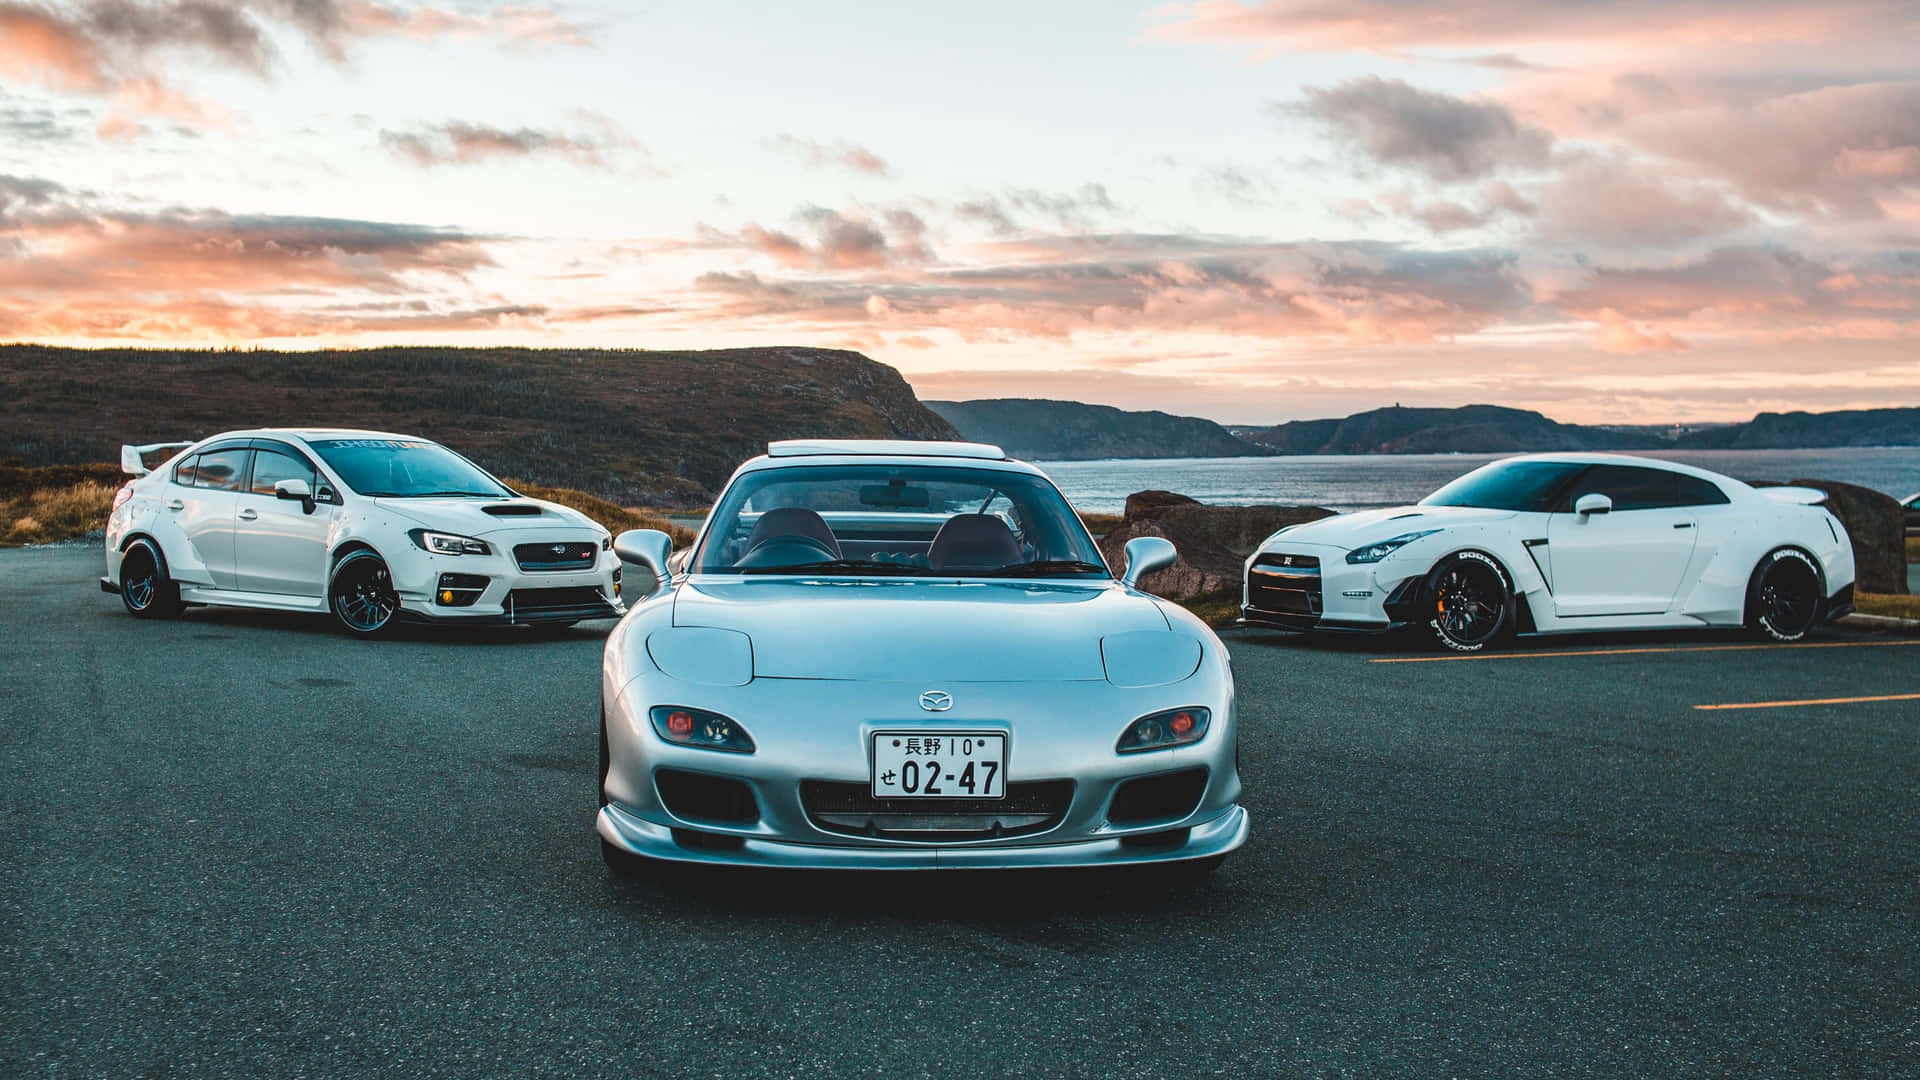 Mazda Rx 7 With Ocean View Landscape Wallpaper